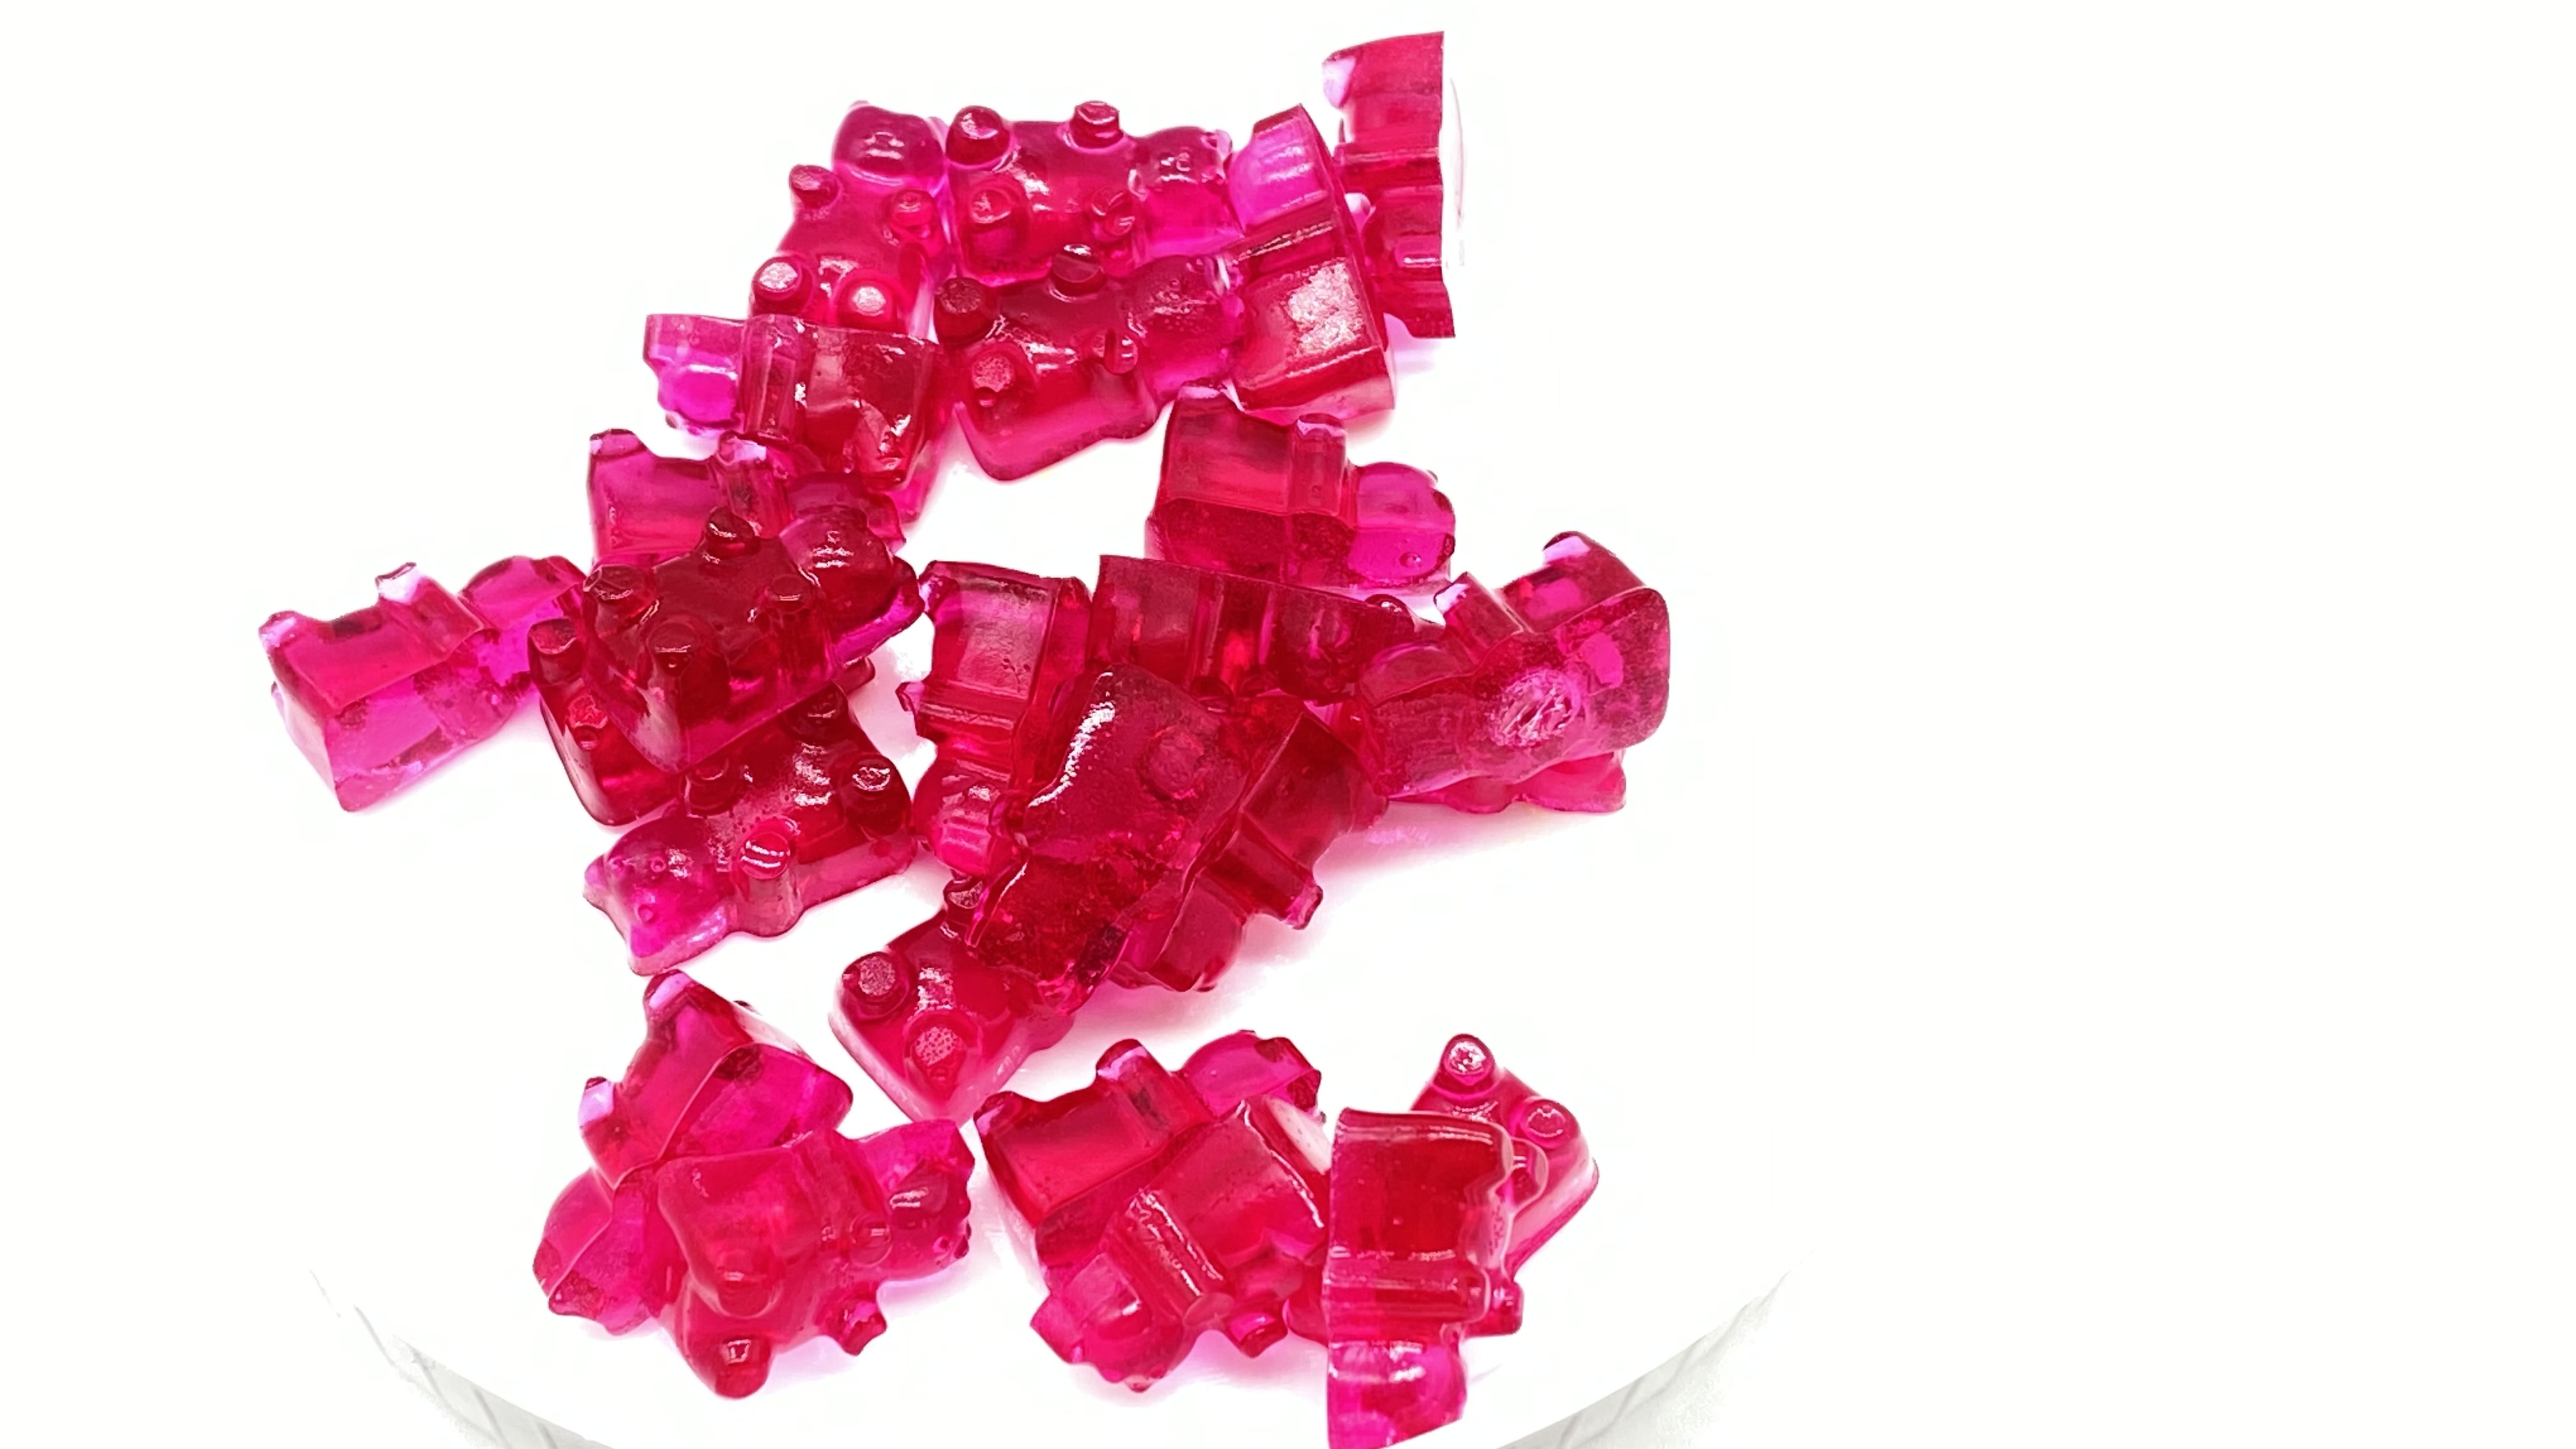 Pink red beet Extract gummy bear